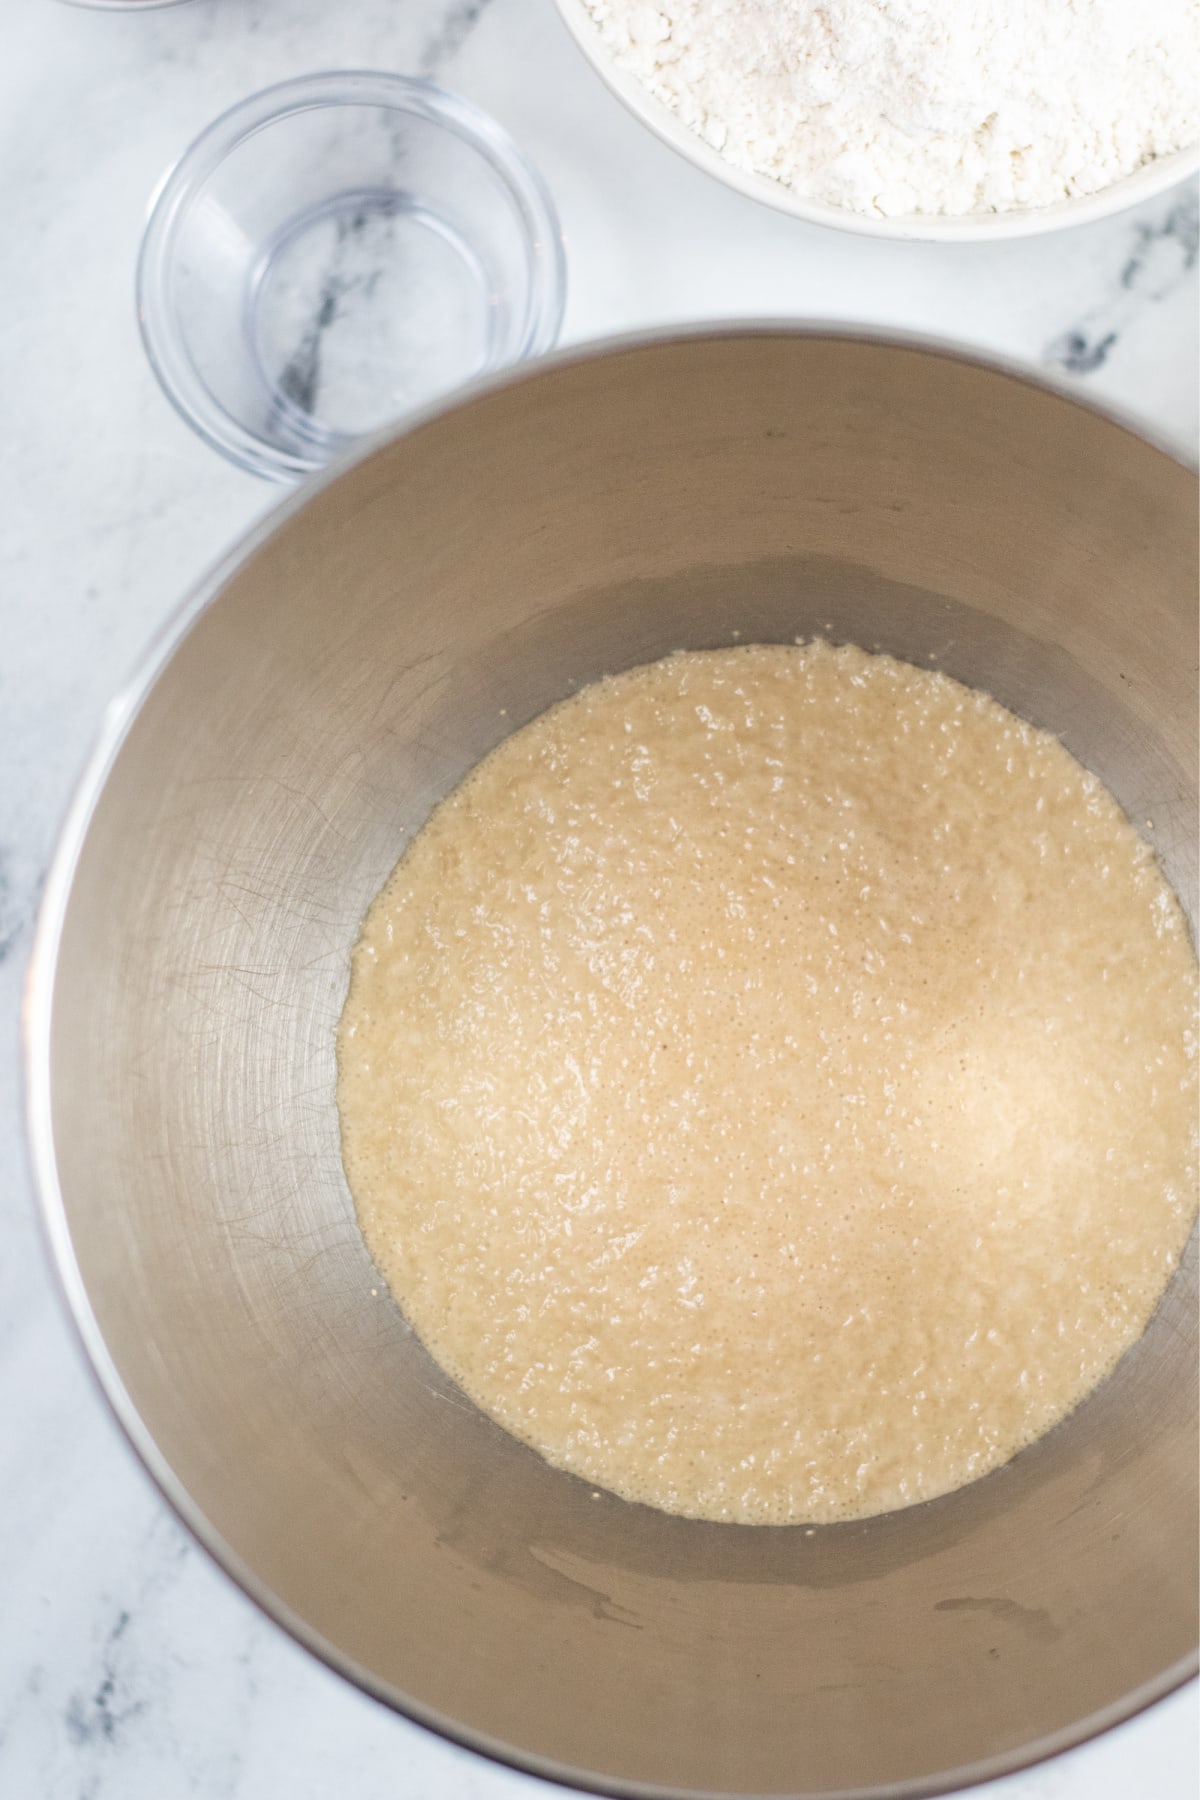 Water, sugar and yeast in a bowl